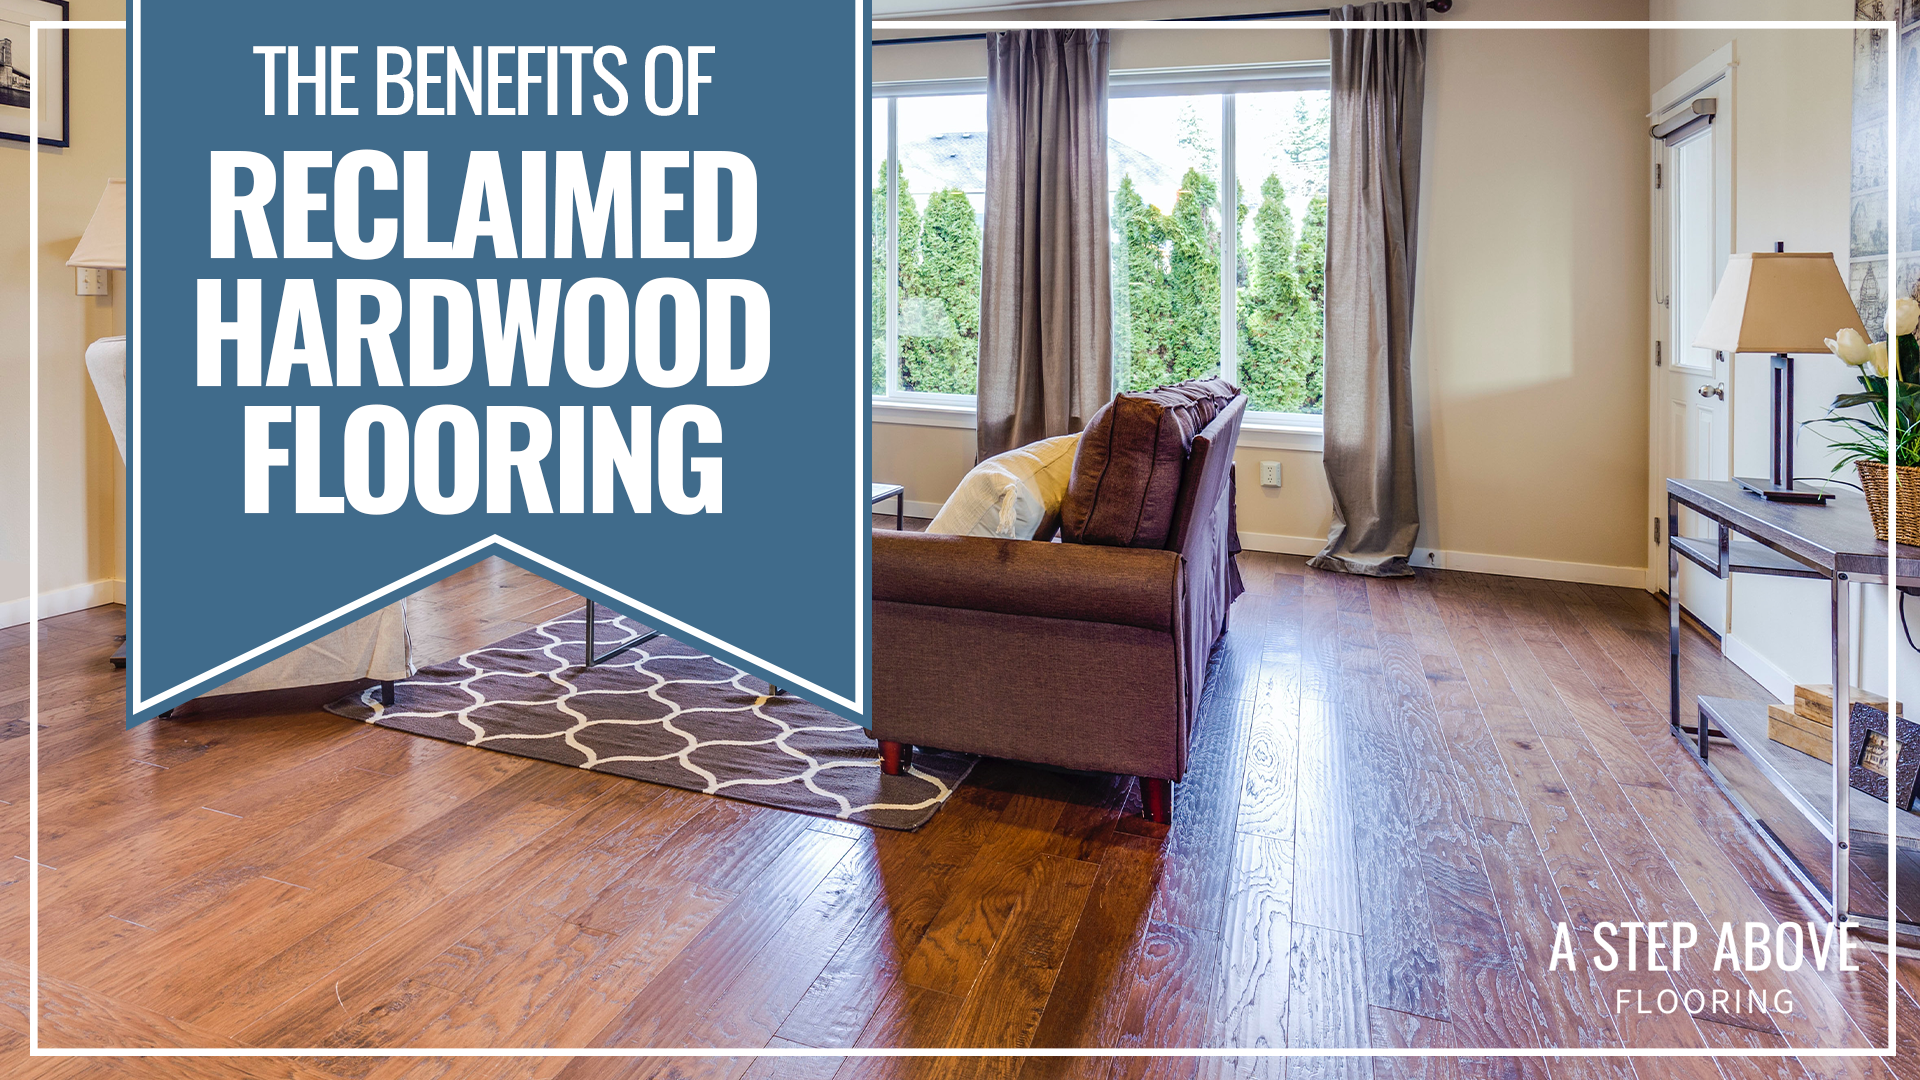 A living room with hardwood flooring. The text reads, "The Benefits of Reclaimed Hardwood Flooring" 